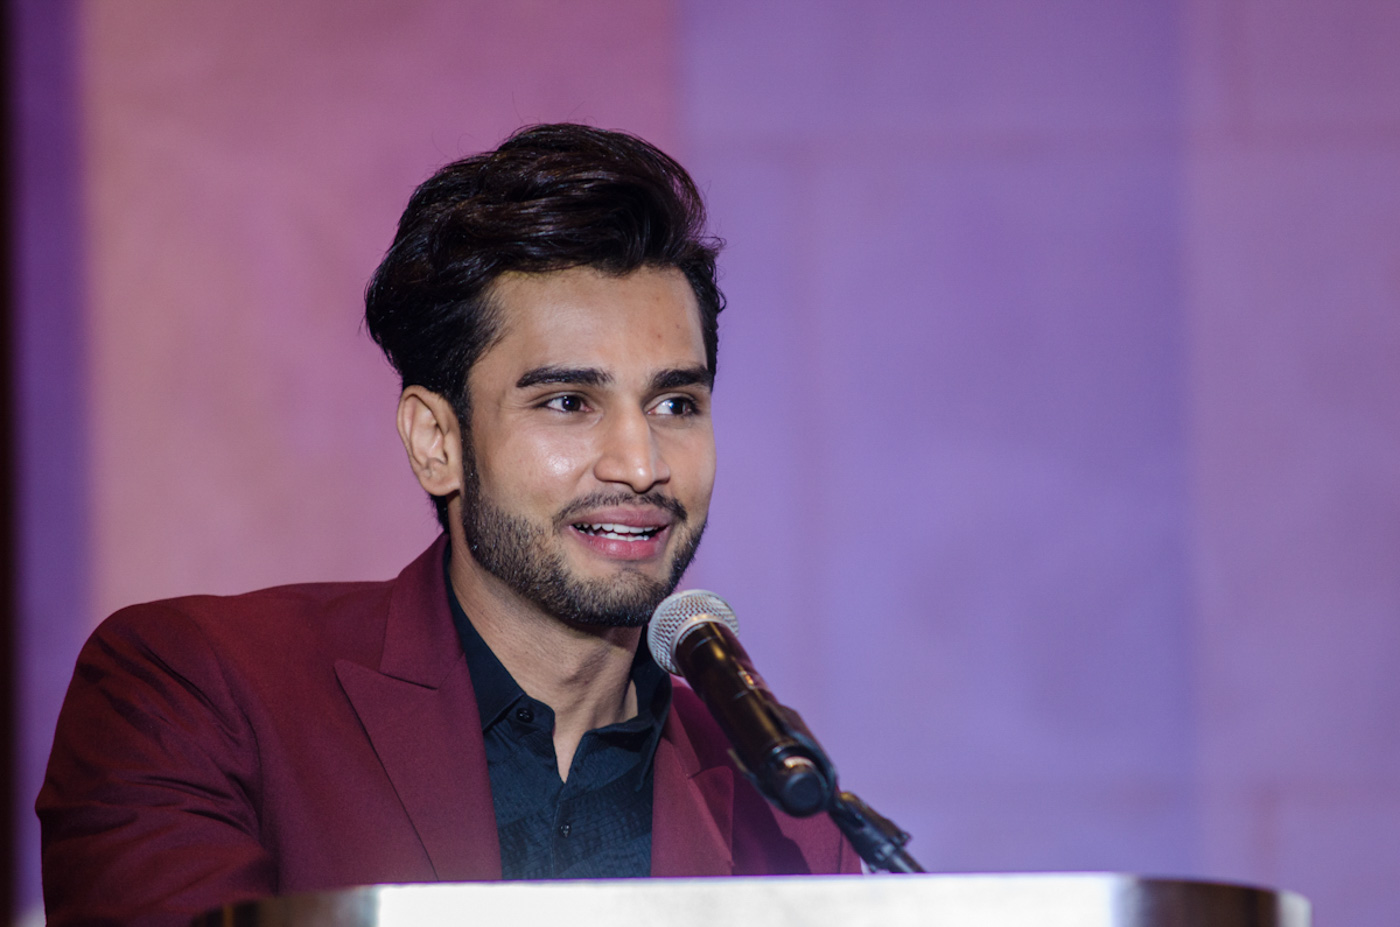 LONGEST MR WORLD TITLEHOLDER. Rohit Khandelwal is set to pass his title in January, making him the longest reigning titleholder of Mr World. 